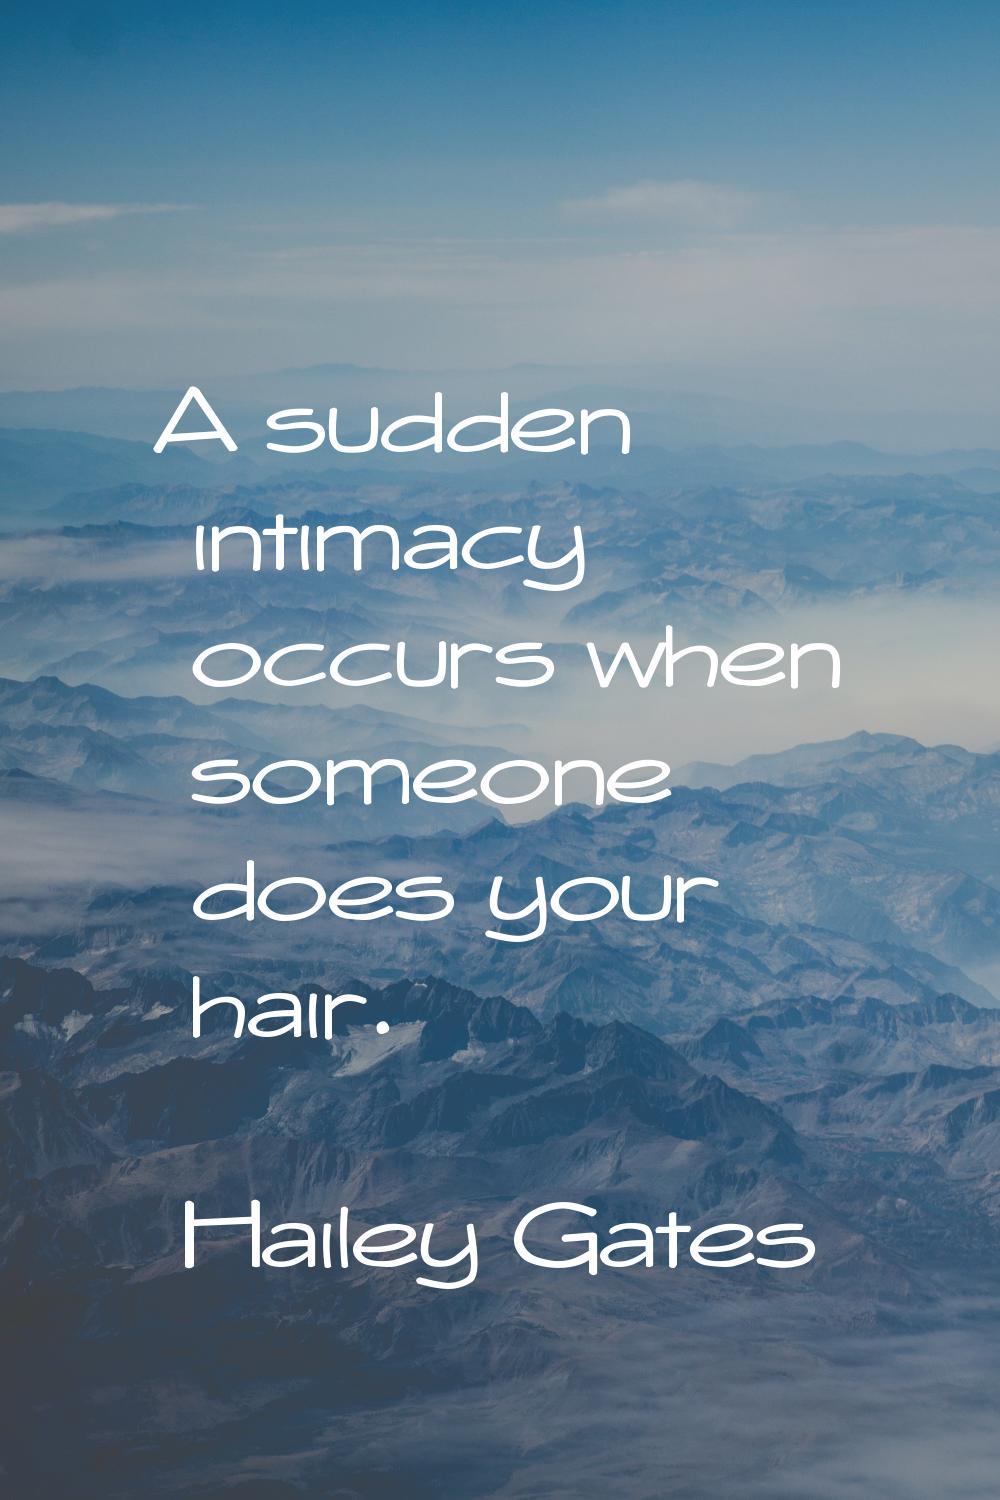 A sudden intimacy occurs when someone does your hair.